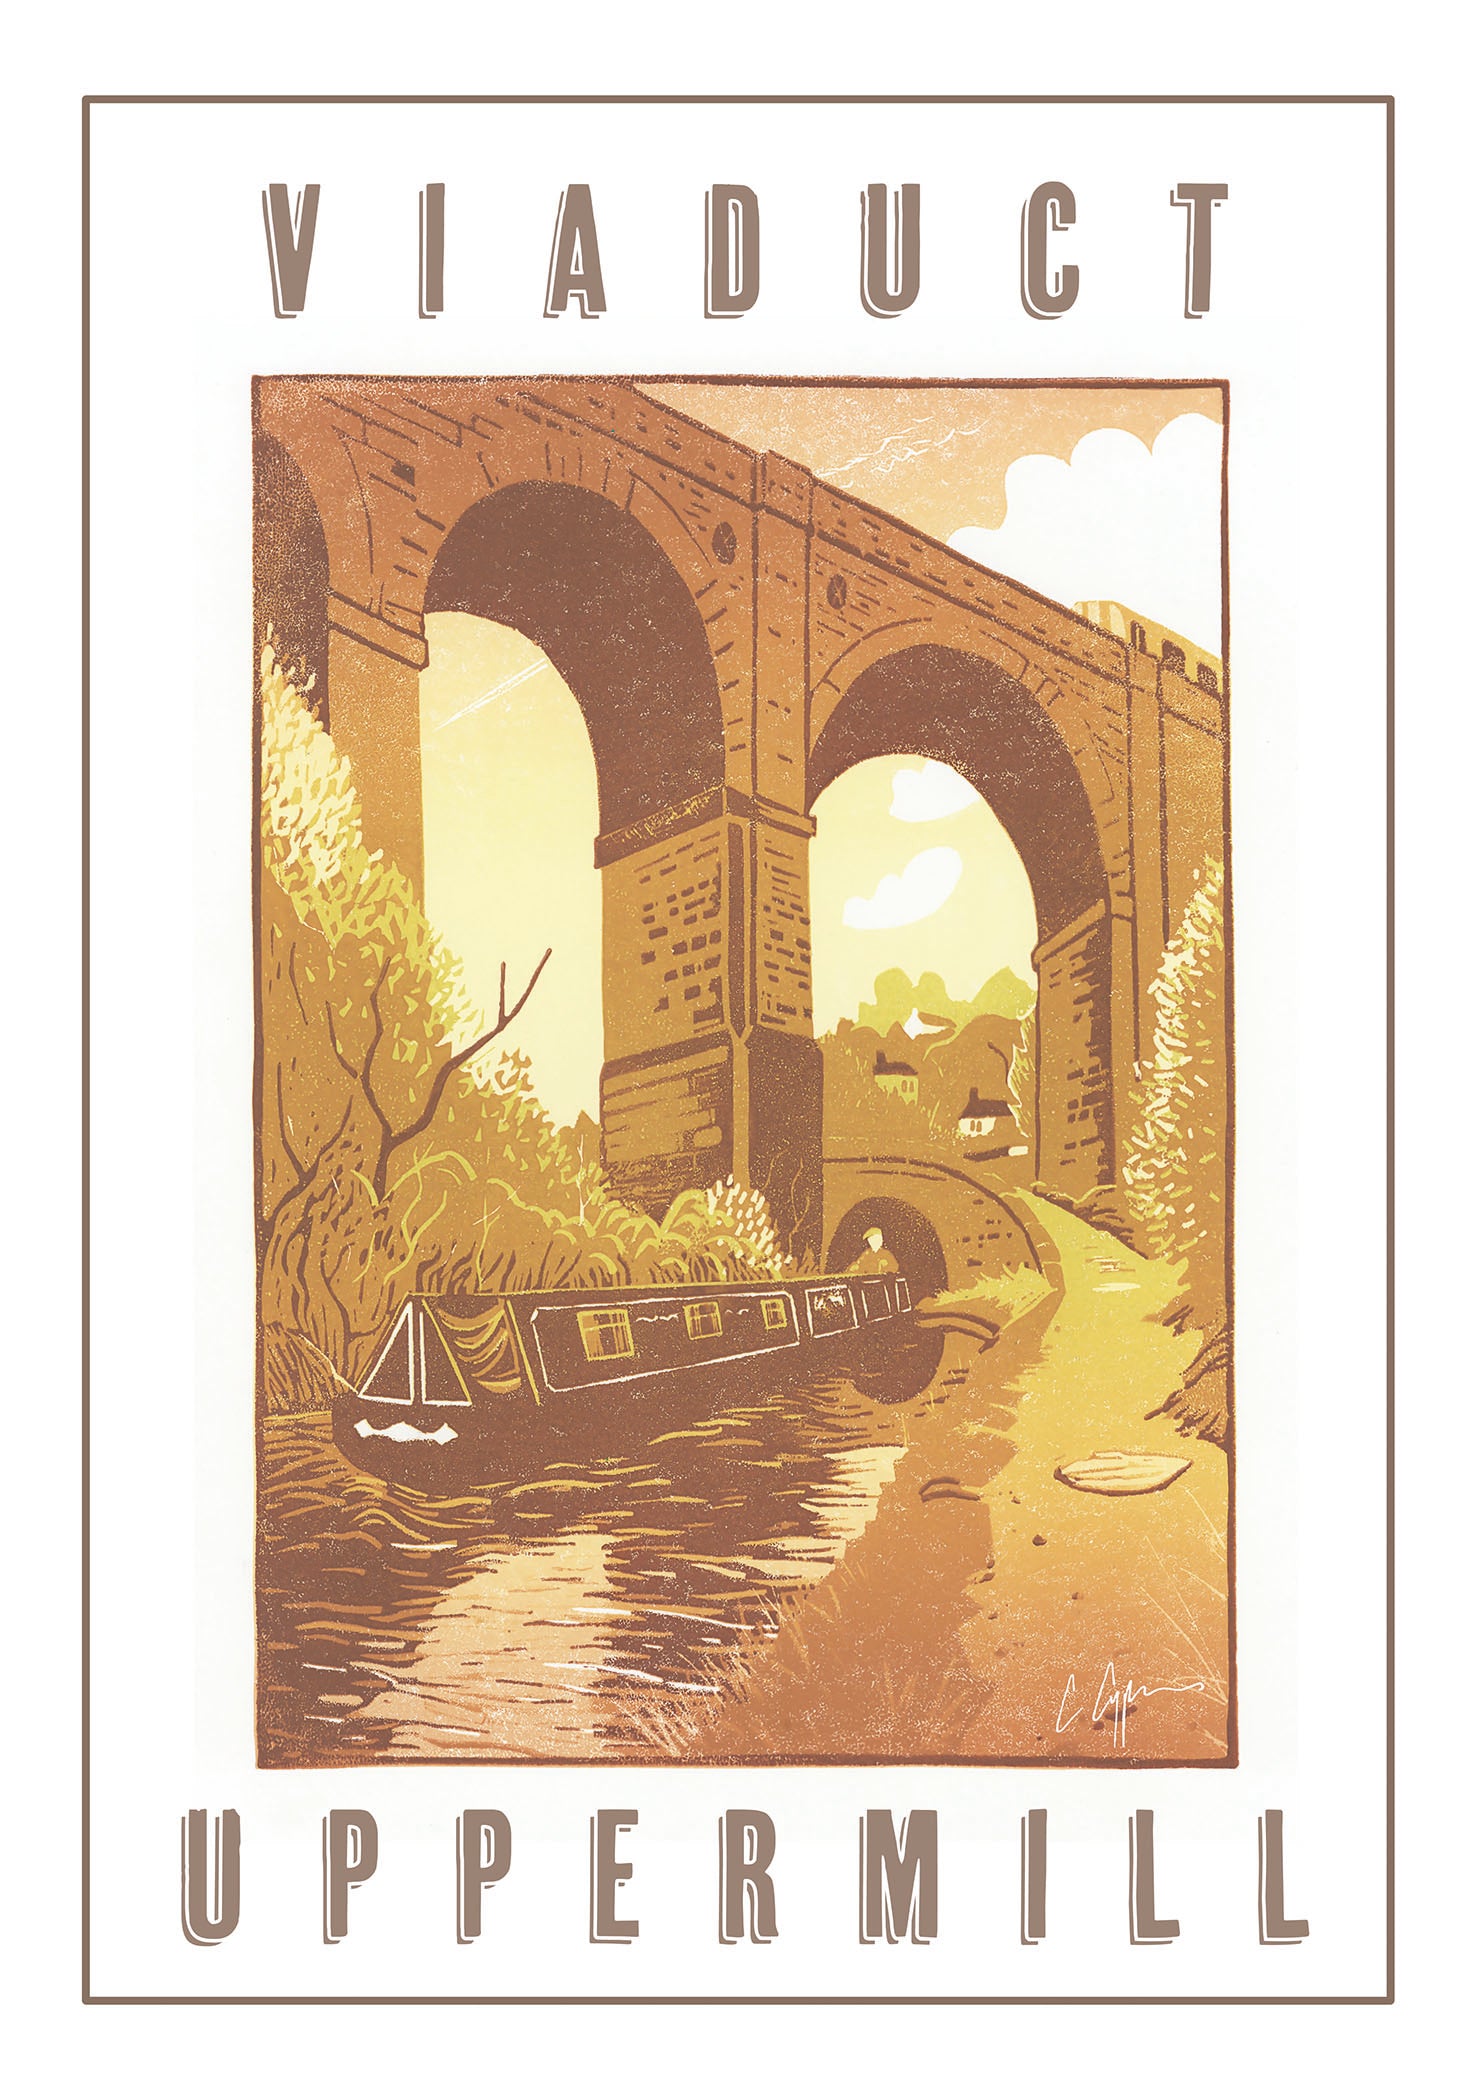 A beautiful reproduction Poster Print featuring a linocut of the viaduct over the canal at Uppermill, Oldham          A2 size         Printed on 250gsm silk board paper - sustainably sourced         Tube rolled ideal for worldwide shipping